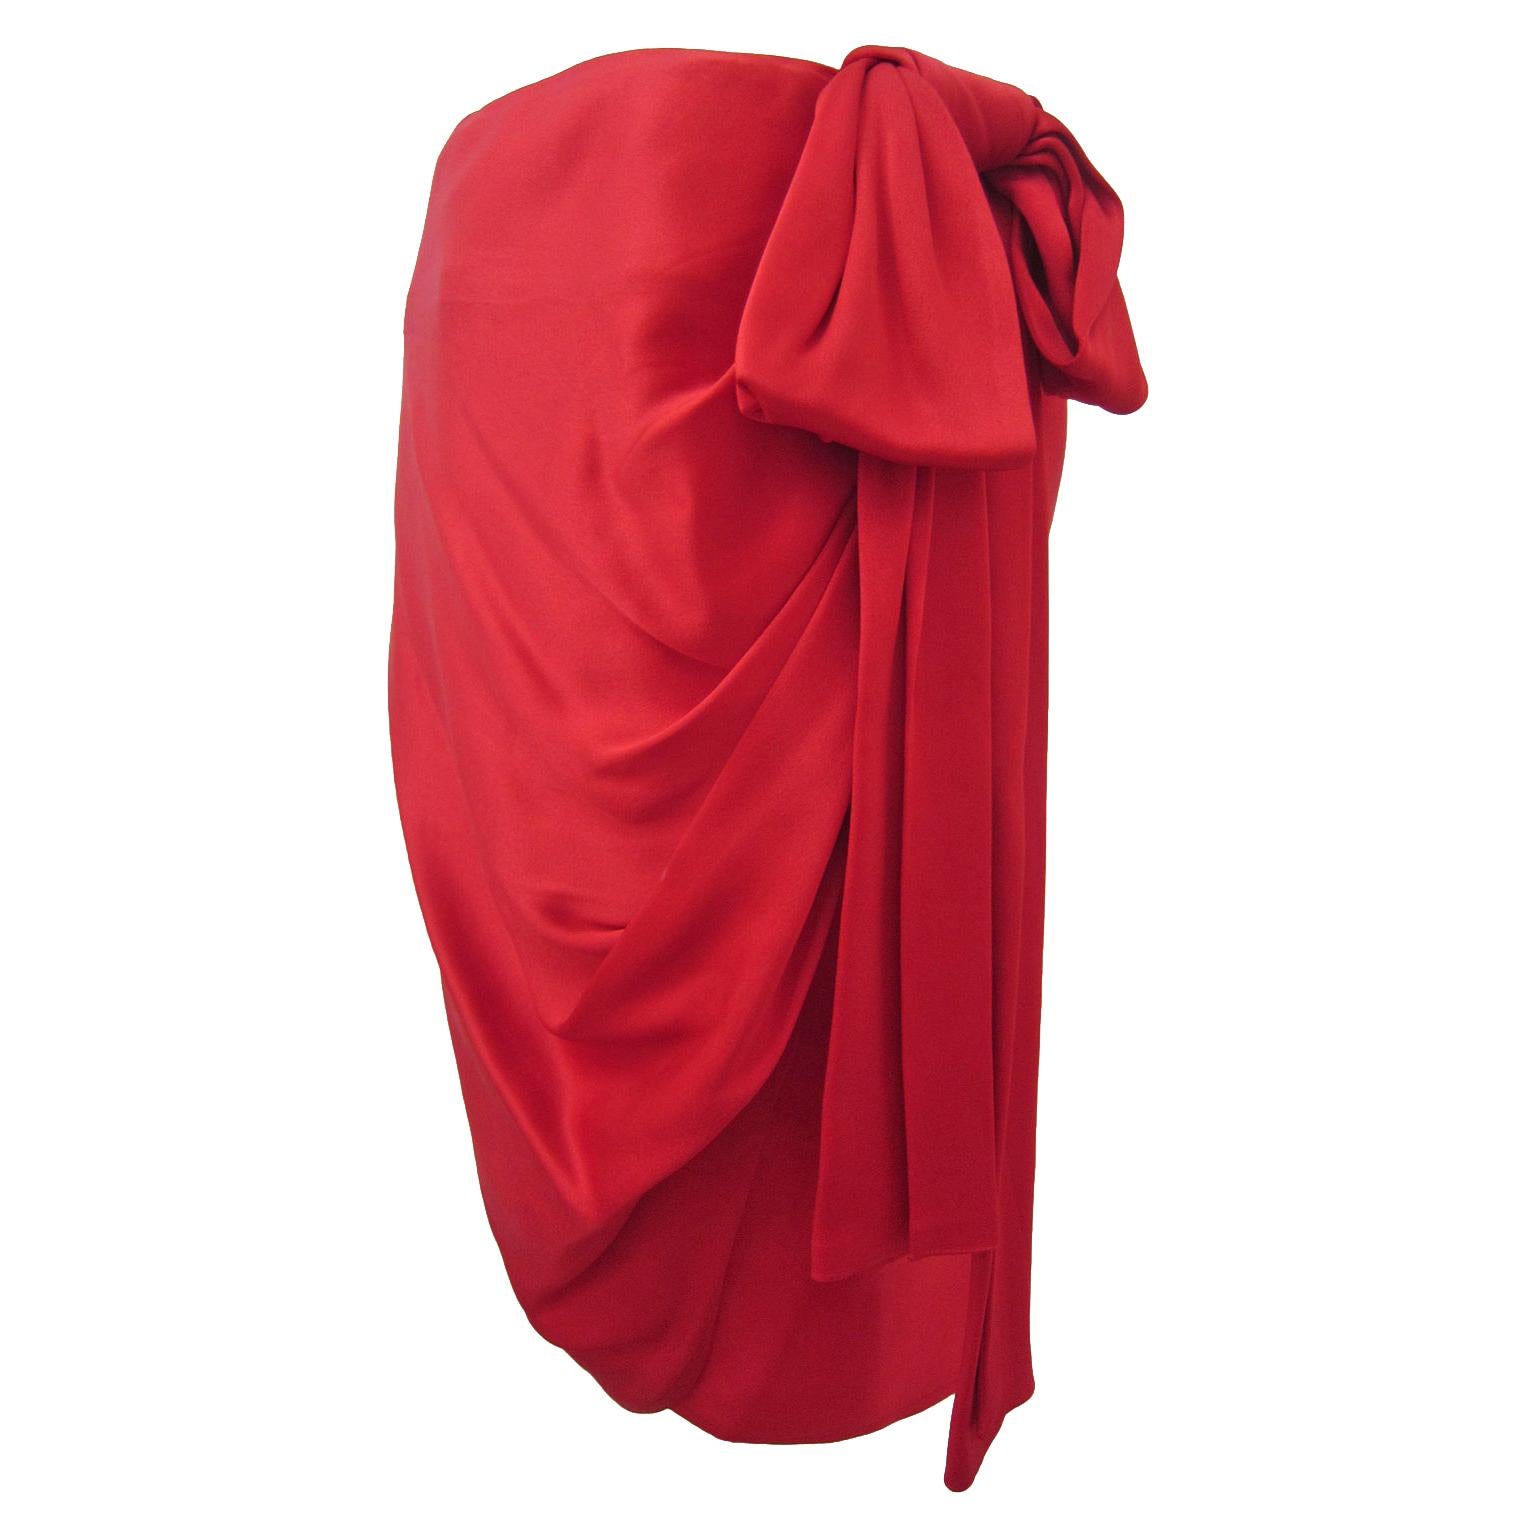 YSL Rive Gauche Royal Red Satin Skirt With Bow 1985